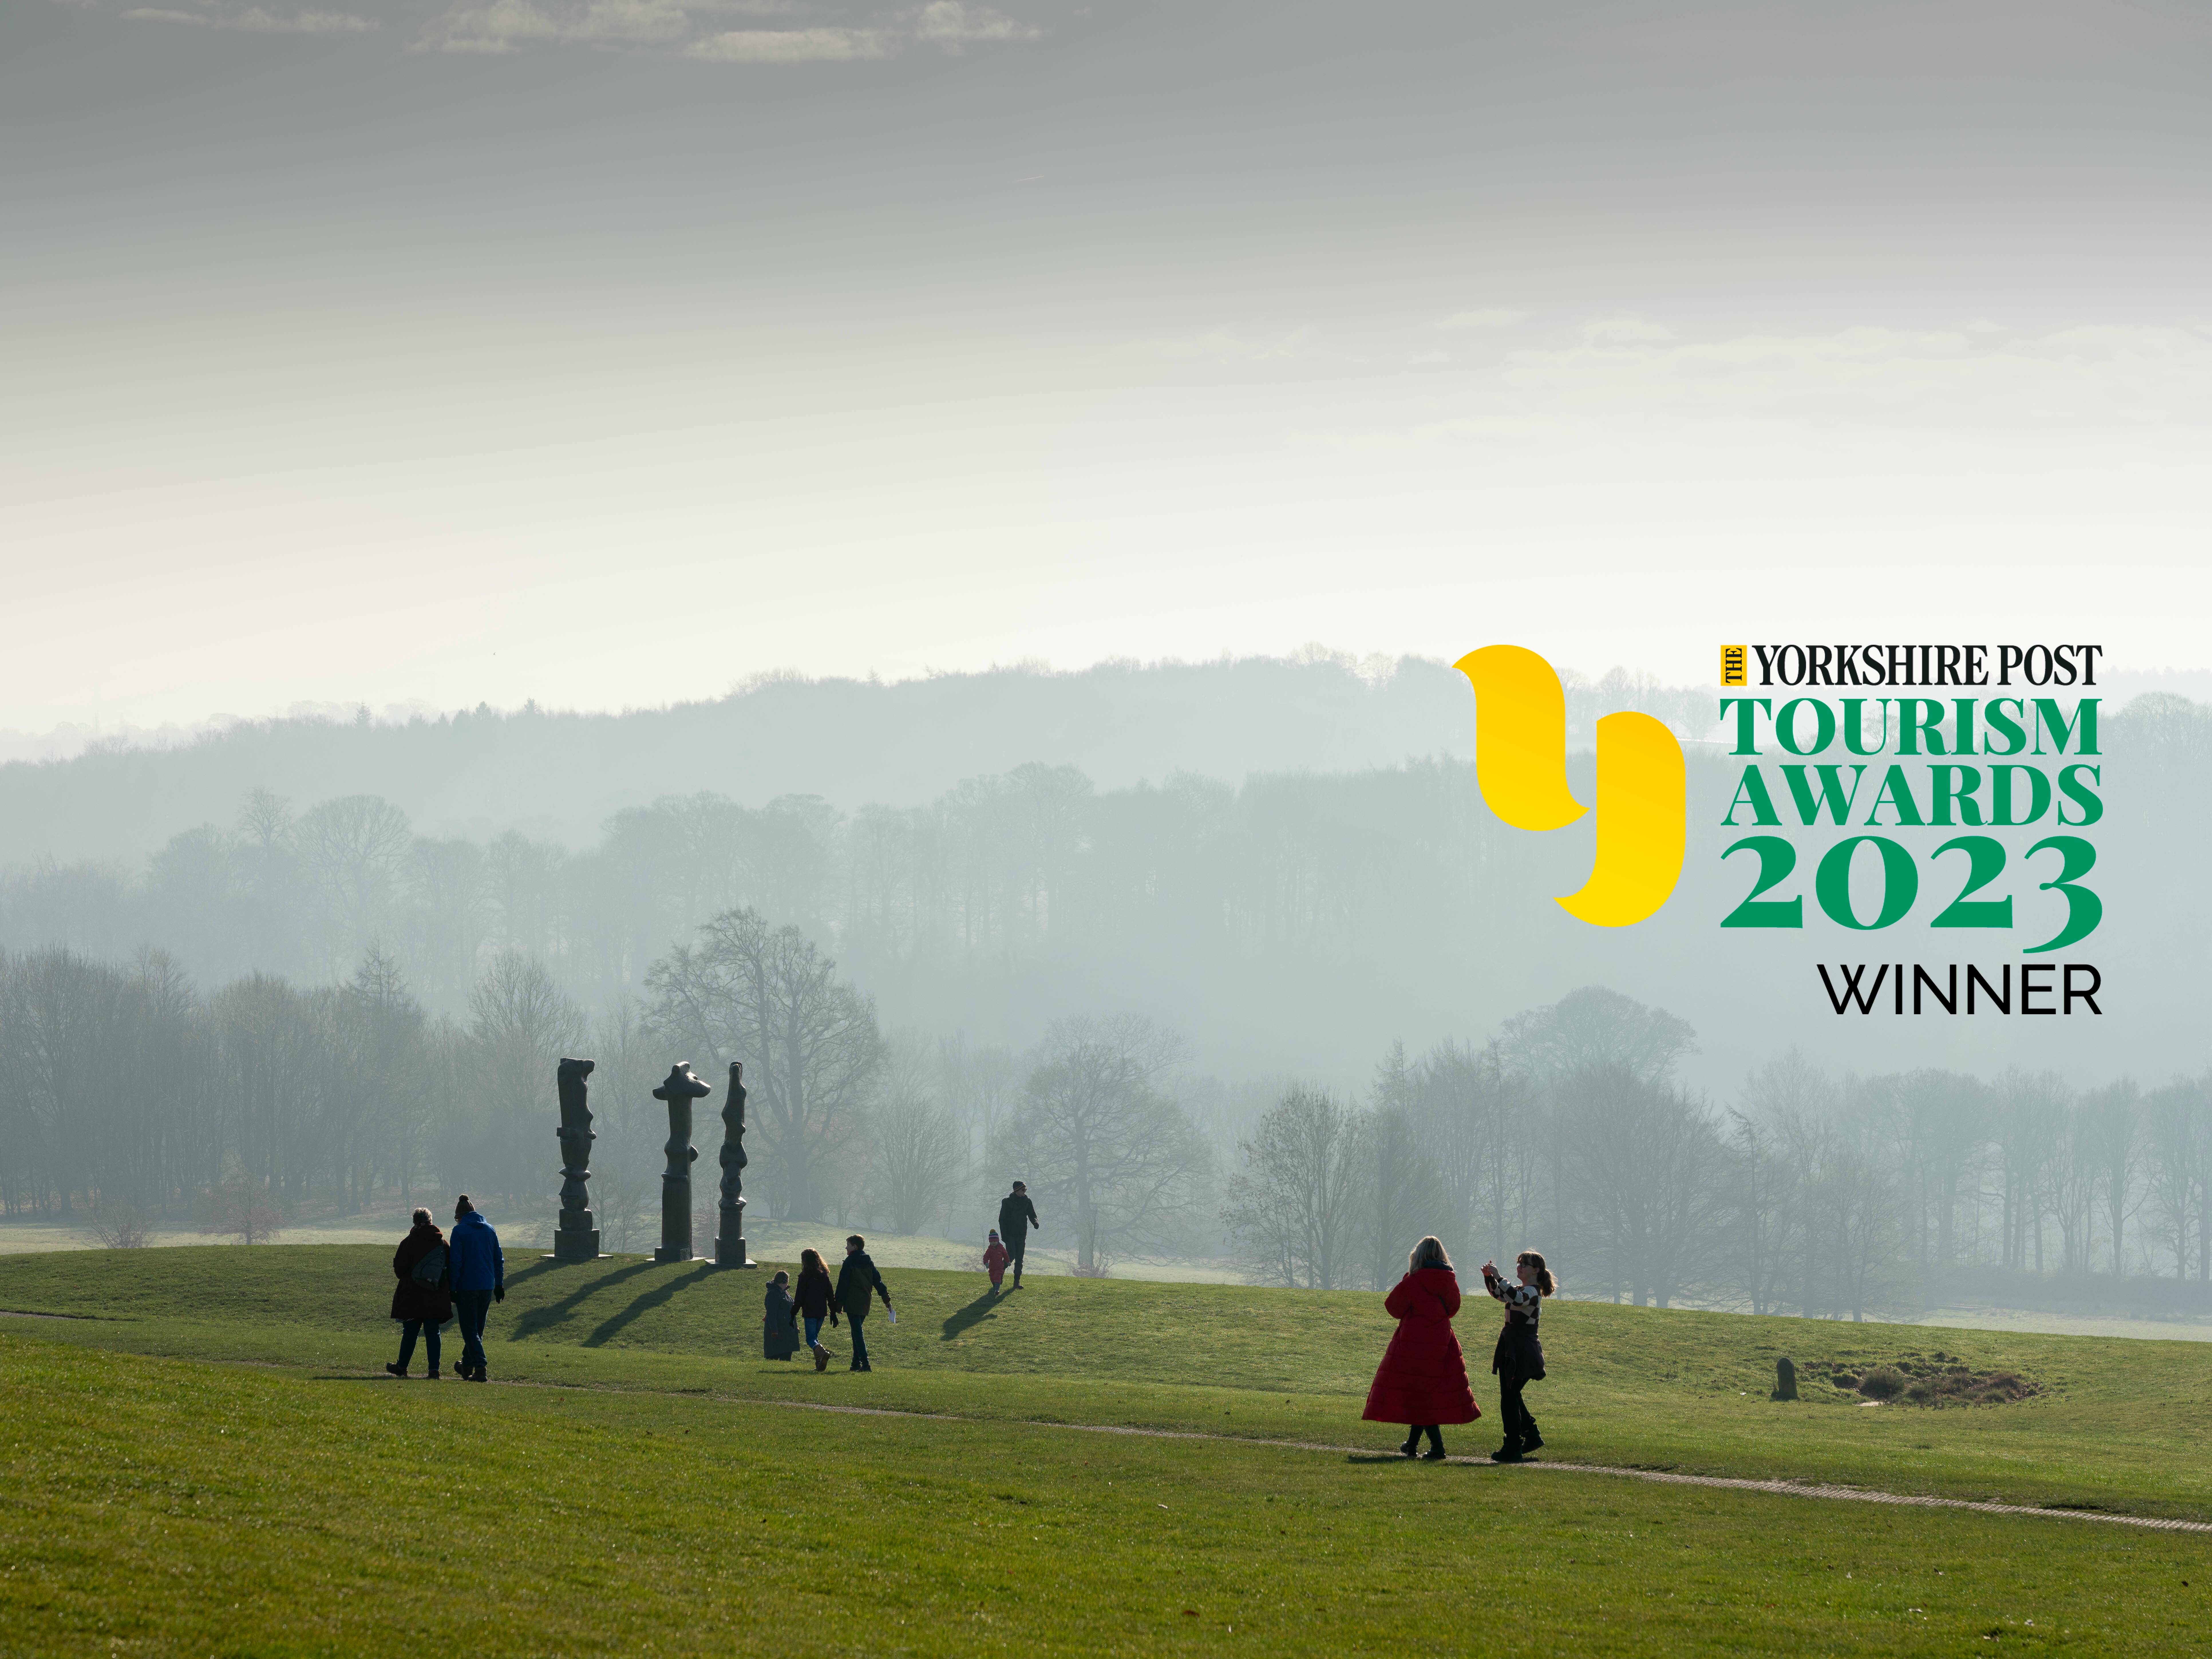 People walking across a hillside, with three tall thin silhouetted sculptures and trees in the background. The Yorkshire Post Tourism Award 2023 Winner logo is in the top right corner.